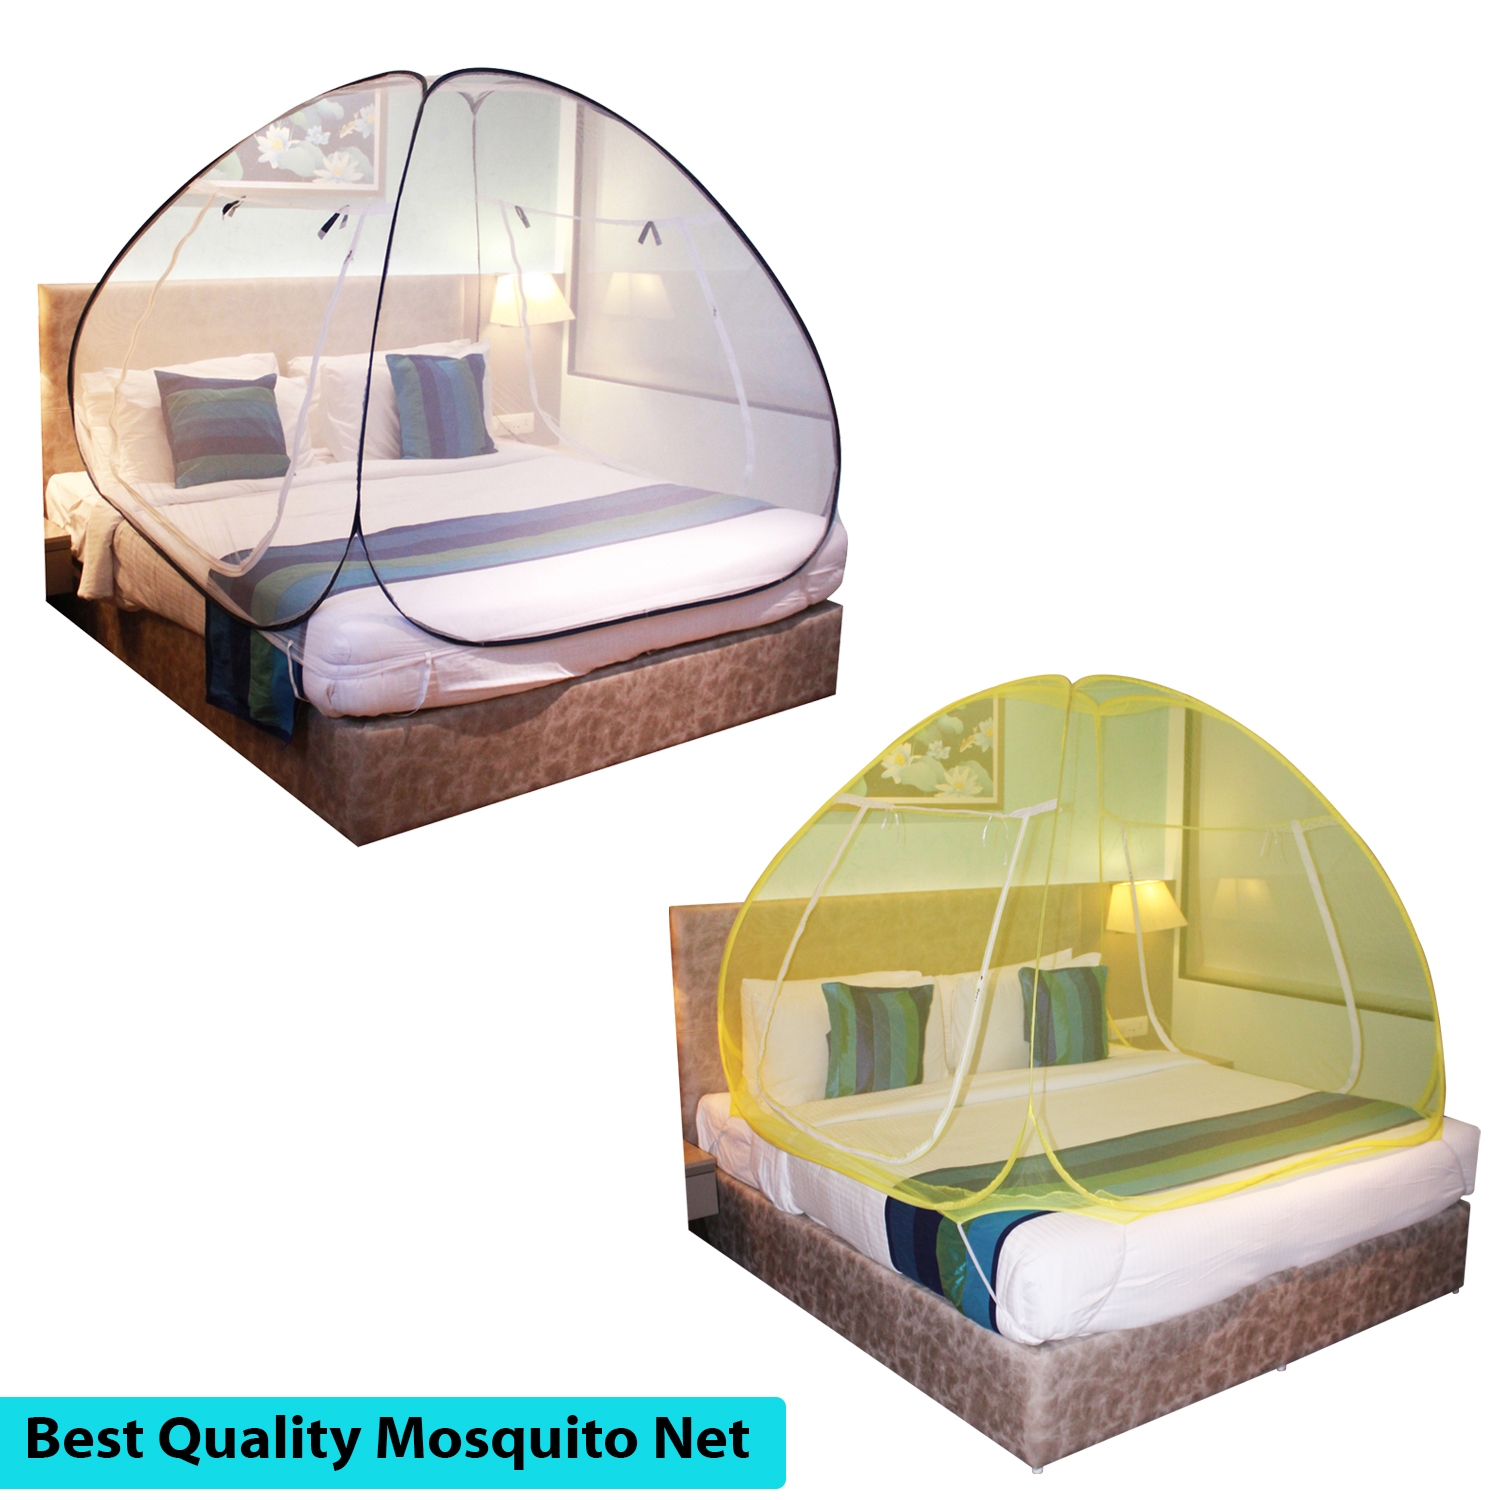 Paola Jewels | Paola Mosquito Net Combo Black Patti And Yellow Foldable Double Bed Net King Size Easily Wash Pack Of 2 0